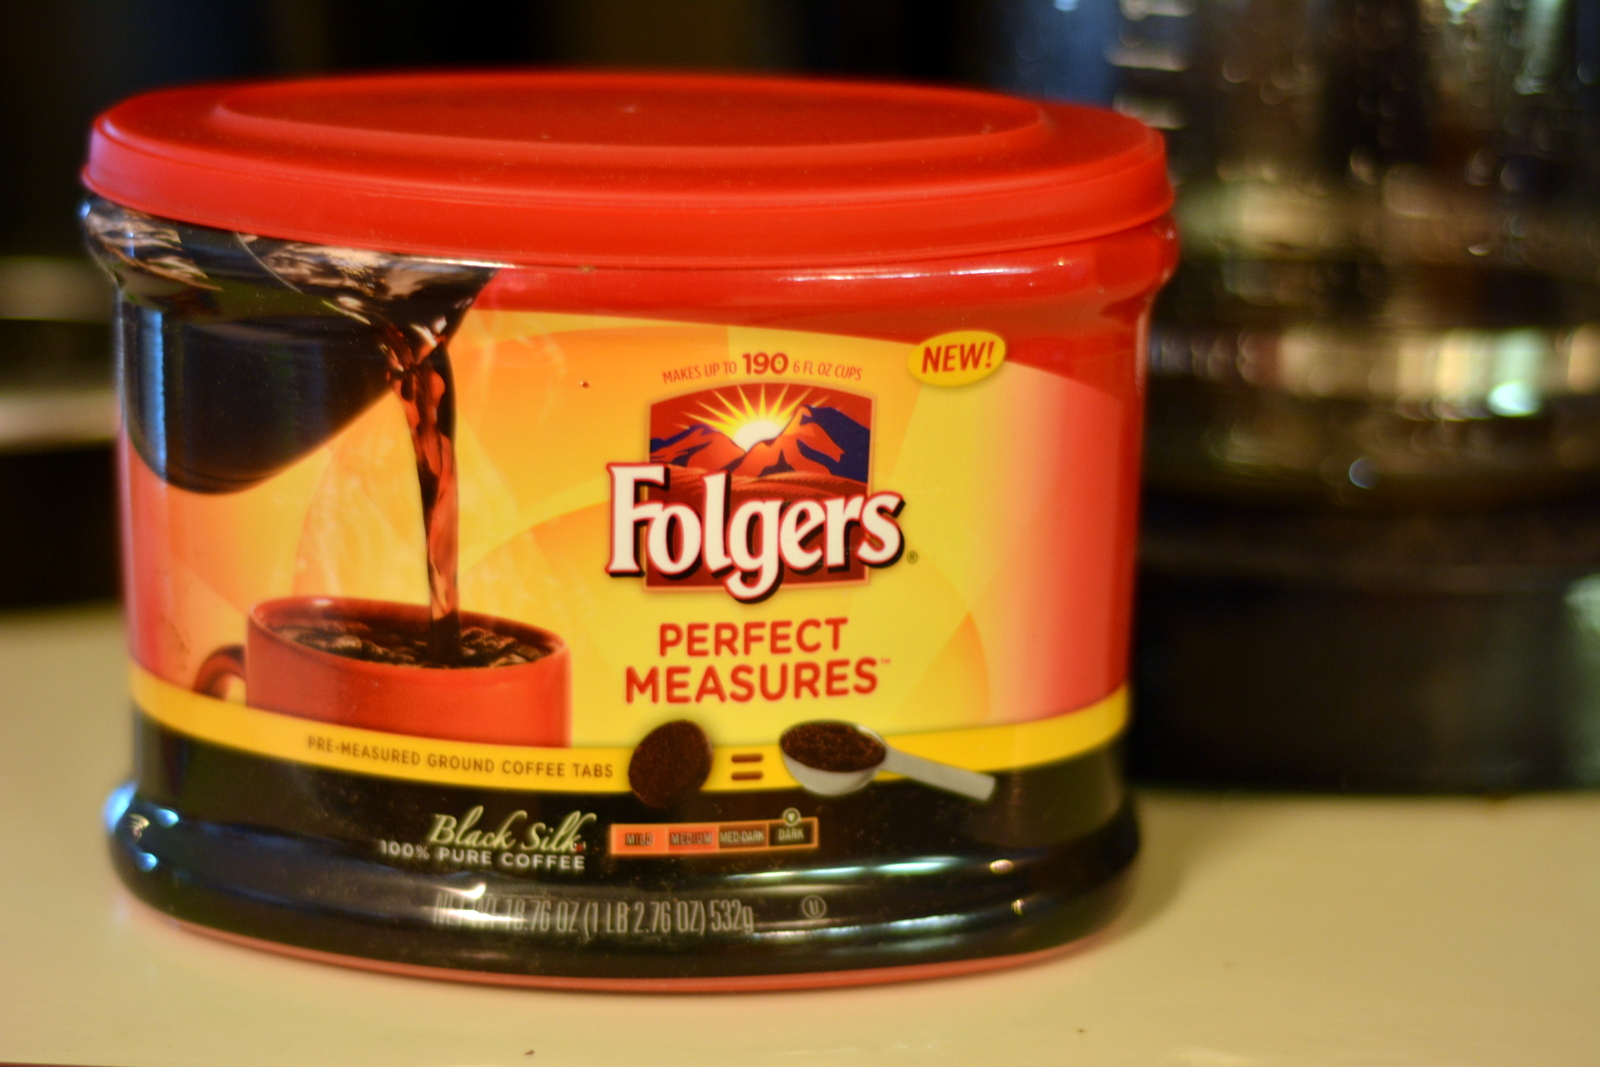 The perfect cup of coffee can start your day off right. Folger Perfect Measures makes sure you have the perfect coffee.